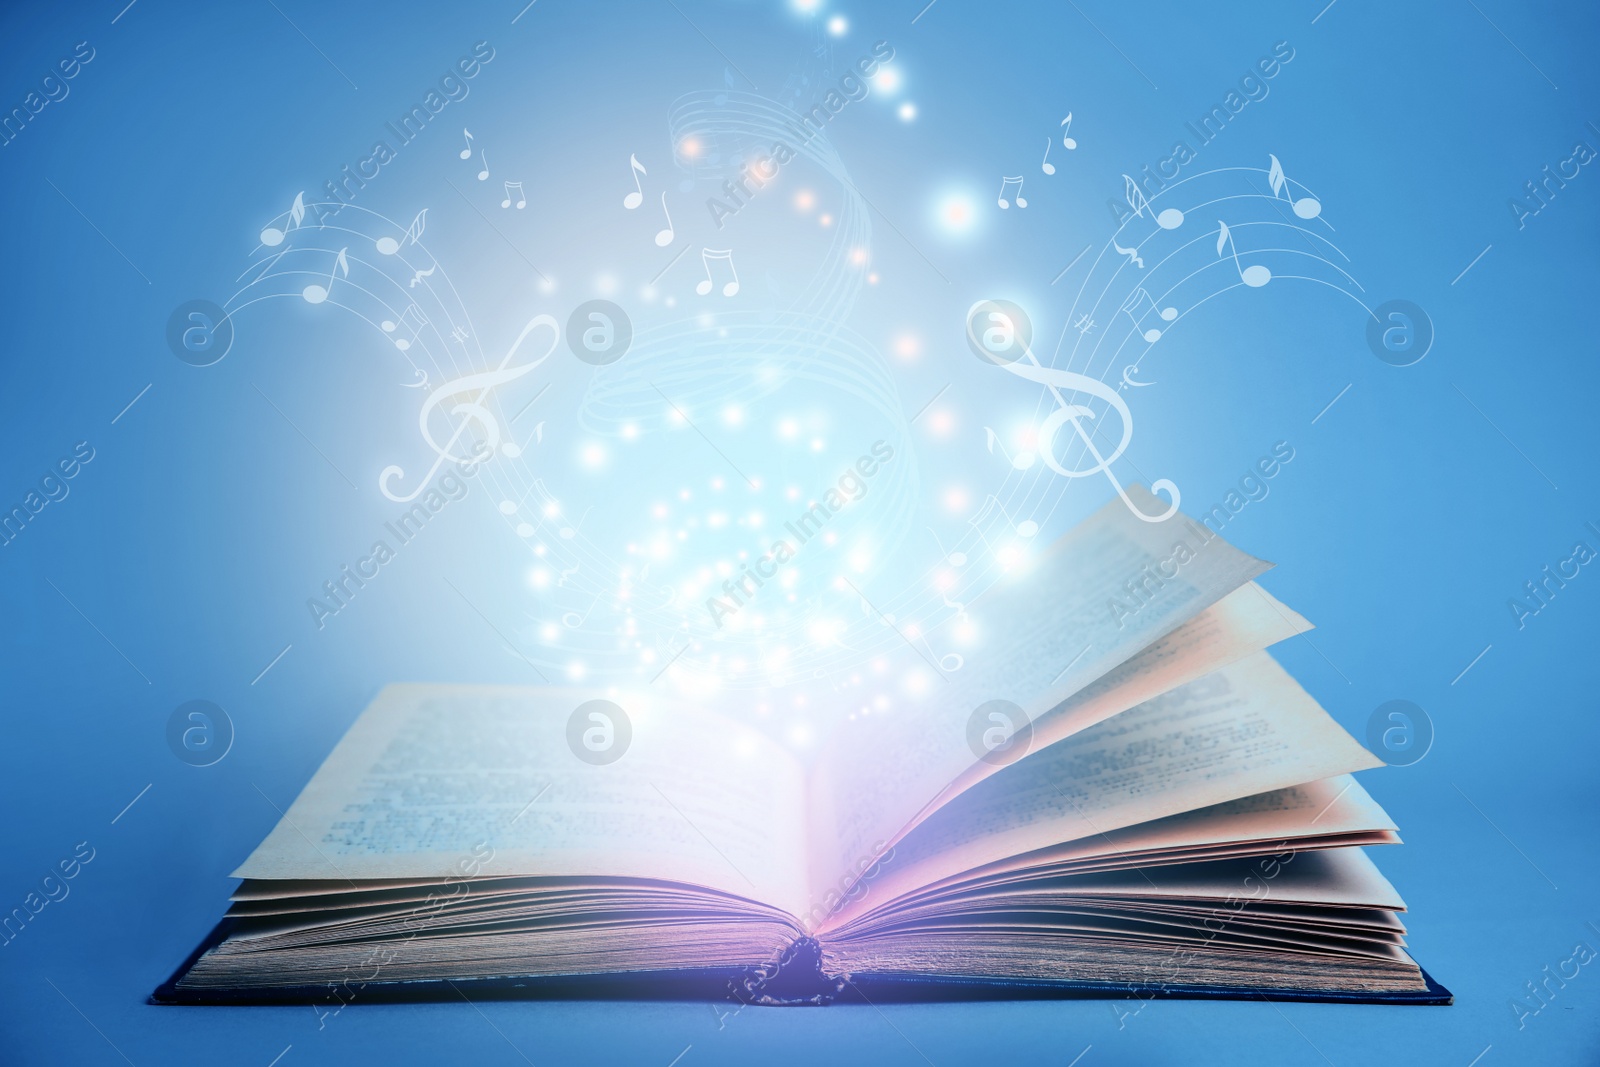 Image of Symphony shining with musical notes from open book on blue background 